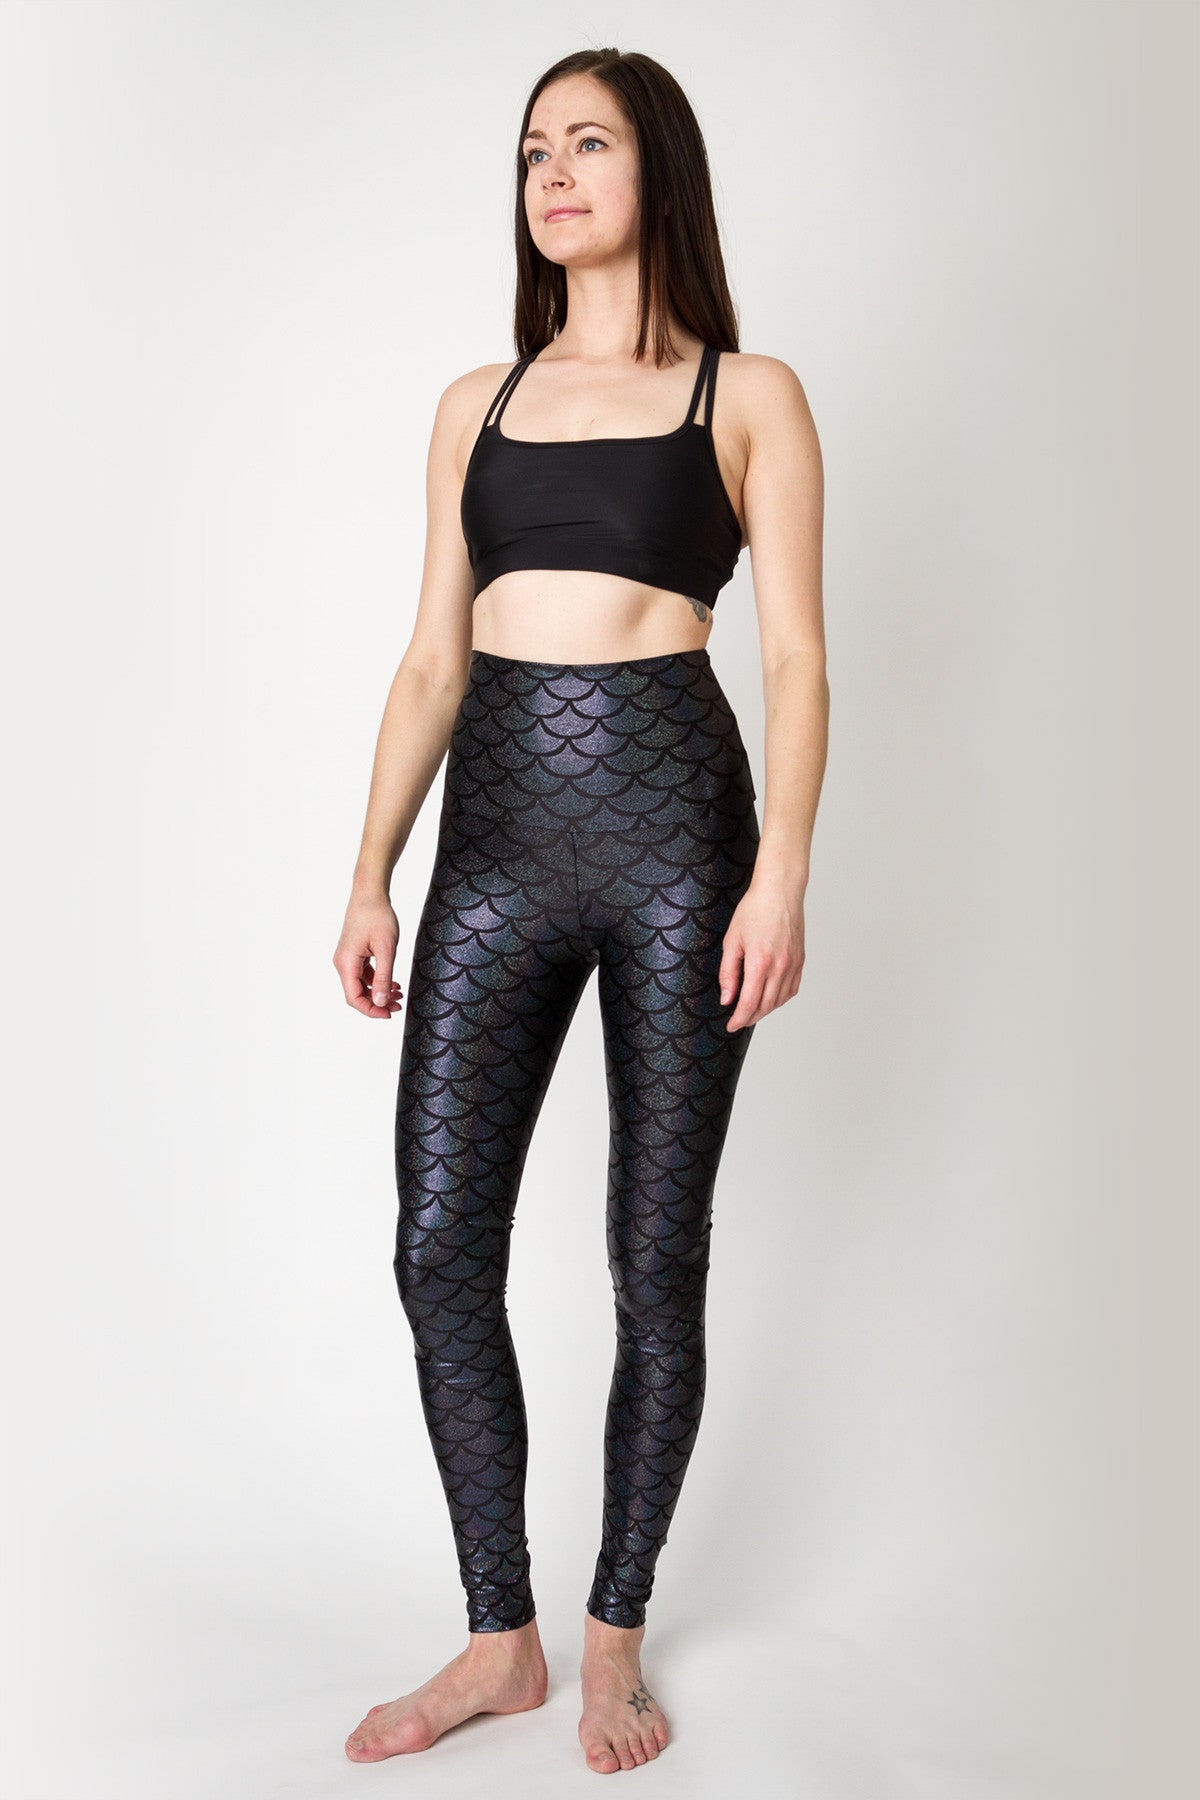 Shop High Waisted Leggings - Made in Canada and US – tagged Tie